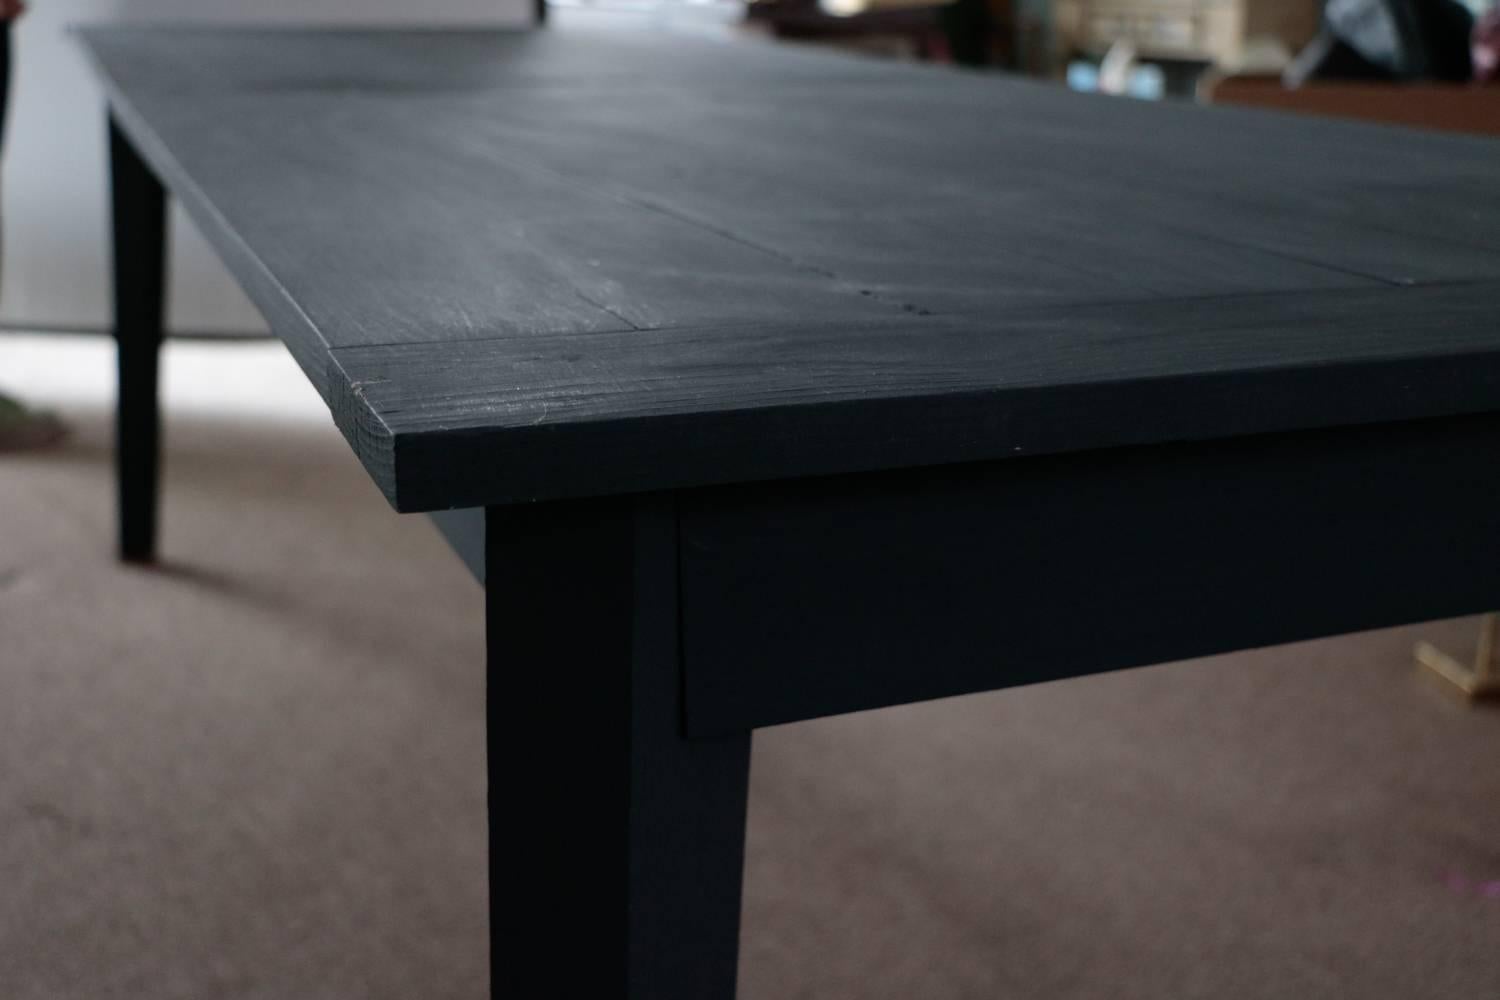 Fantastic, fun, large, slim and sleek- (just how we like 'em) organically custom-made - Organically painted space black farm table. Sits 8-12. Lots of character! This piece will sit 8-12 of your own character's. Great for kid friendly organic